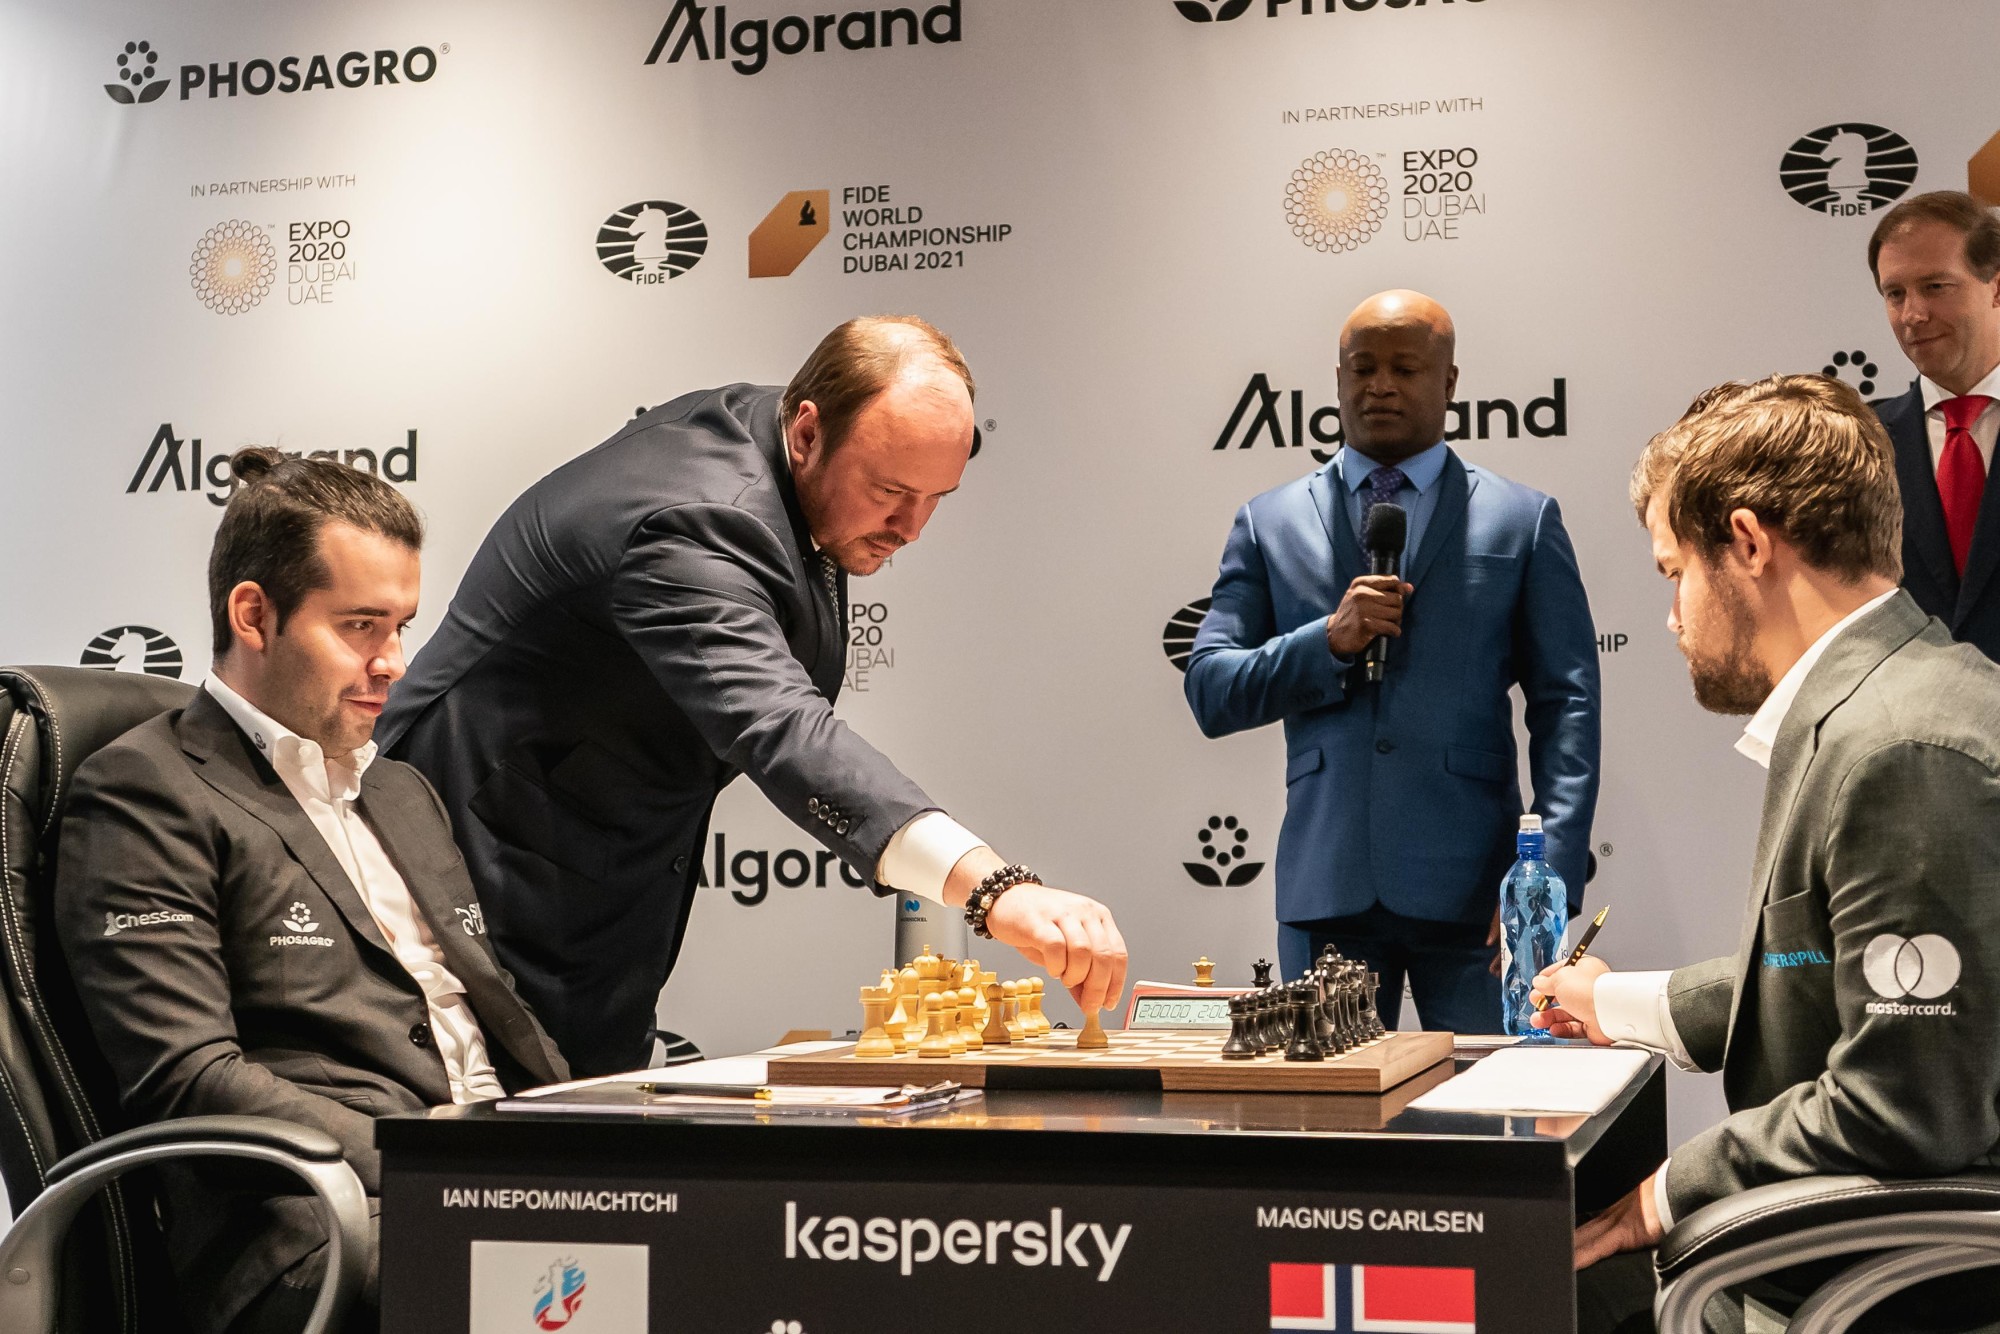 FIDE World Chess Championship first chess piece move is made by Andrey Guryev (L2) CEO of Phosagro accompanied on the stage by Denis Manturov (R1) Minister of Industry and Trade of the Russian Federation for World Chess Championship Game